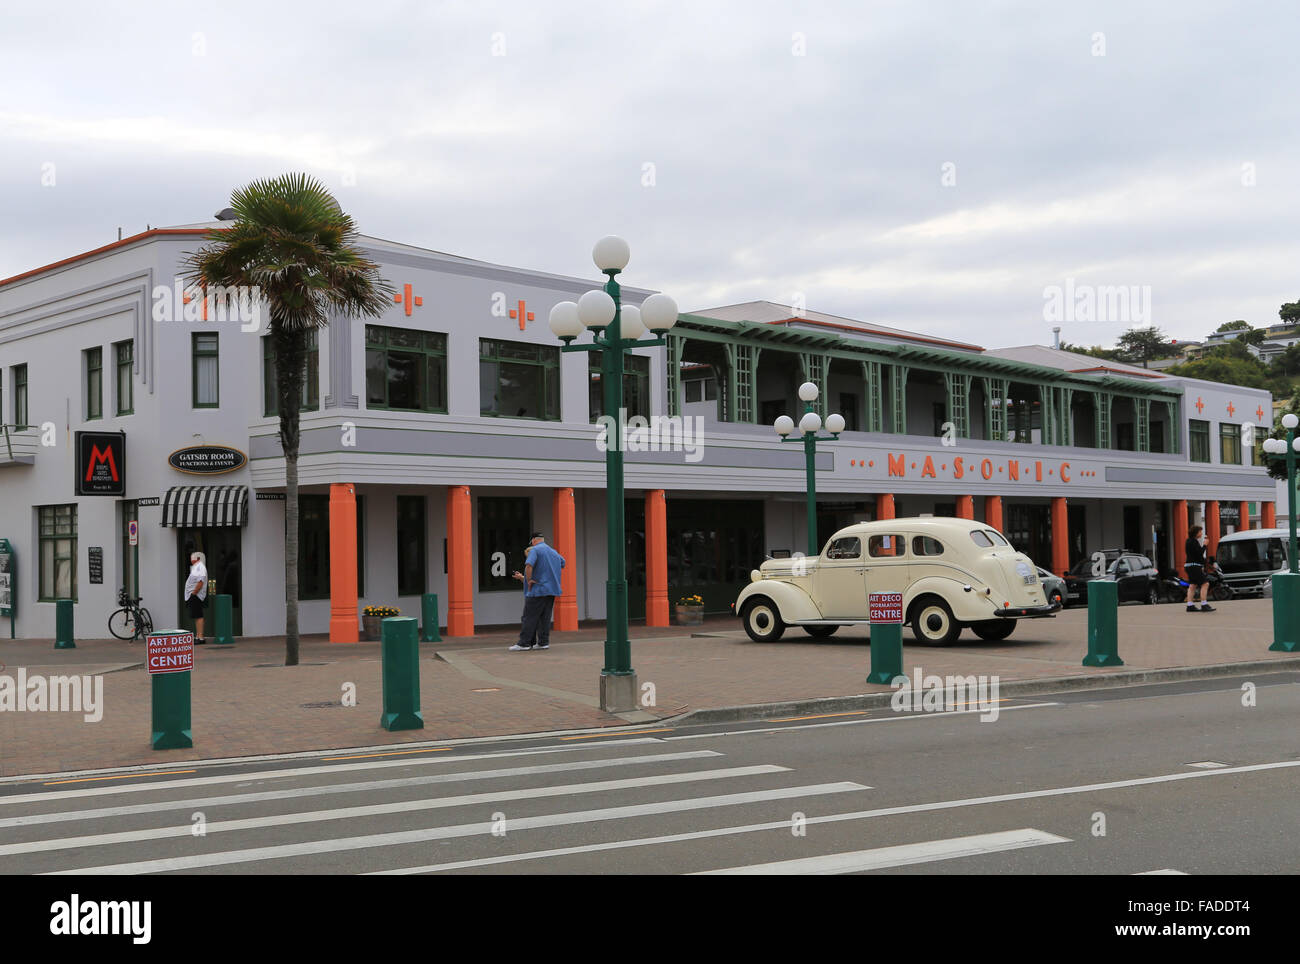 Masonic Hotel and classic 1937 Dodge D5 parked in front in Napier, Hawke's Bay, New Zealand. Stock Photo